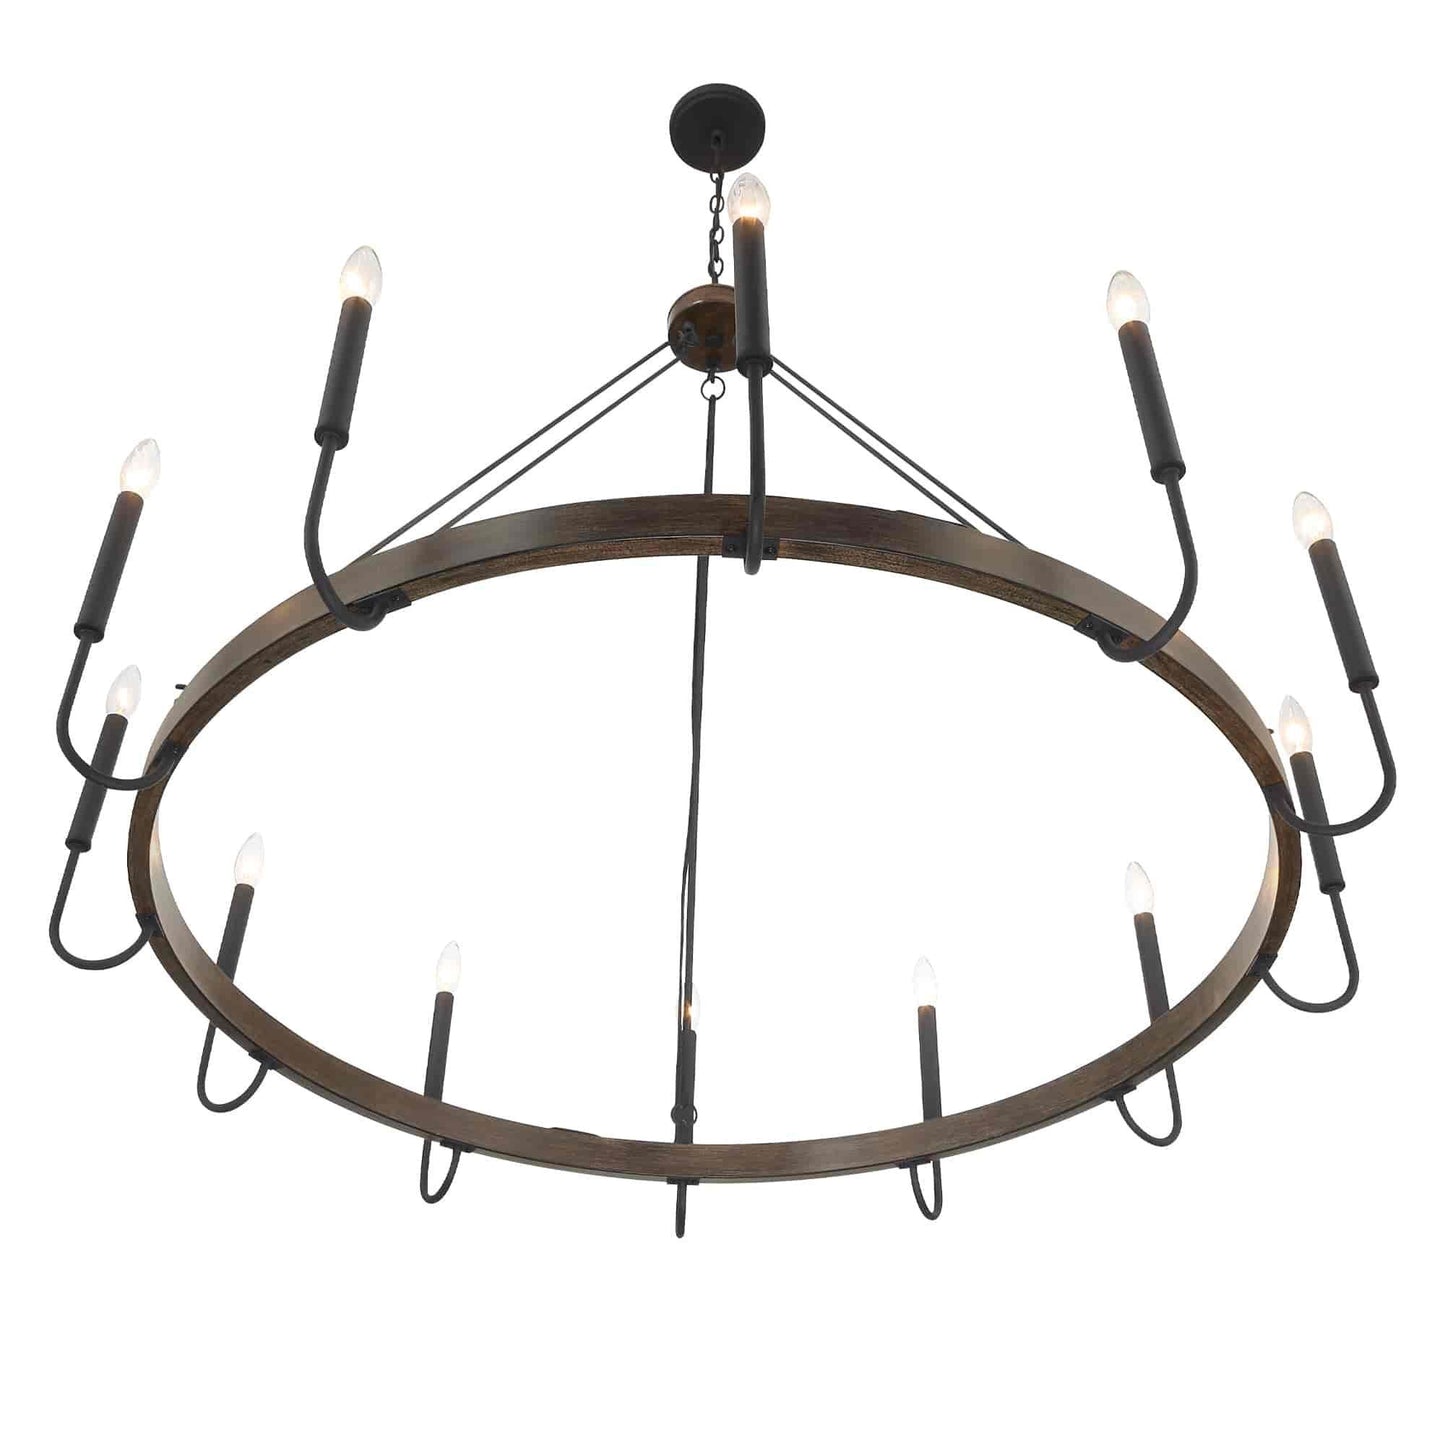 12 light candle style wagon wheel chain chandelier (23) by ACROMA